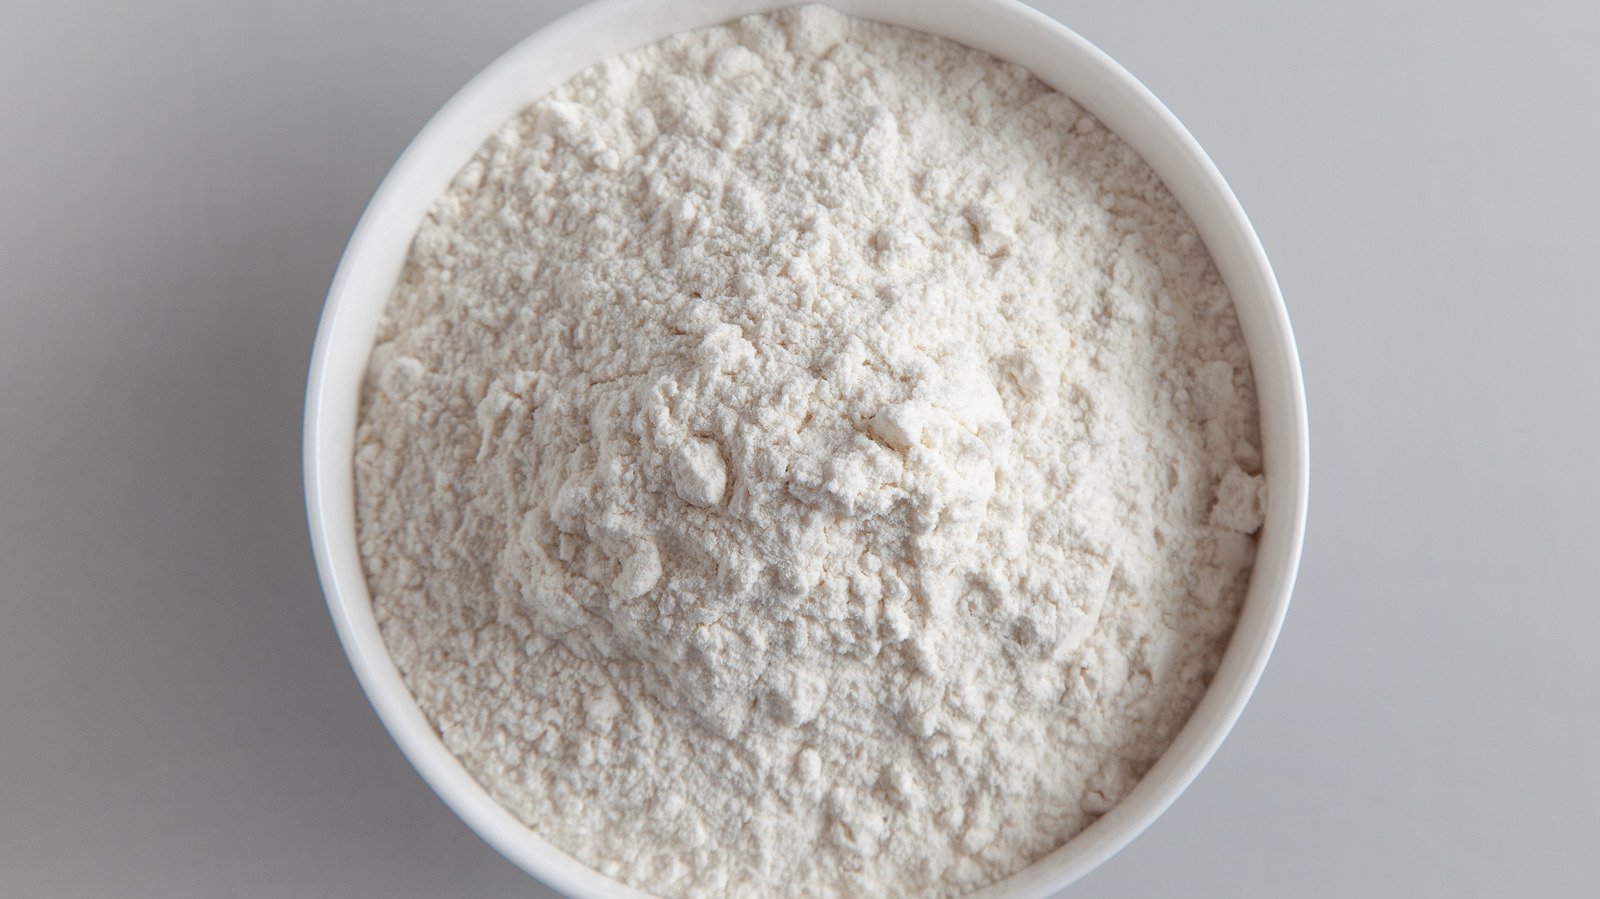 Can You Use Expired Baking Powder?